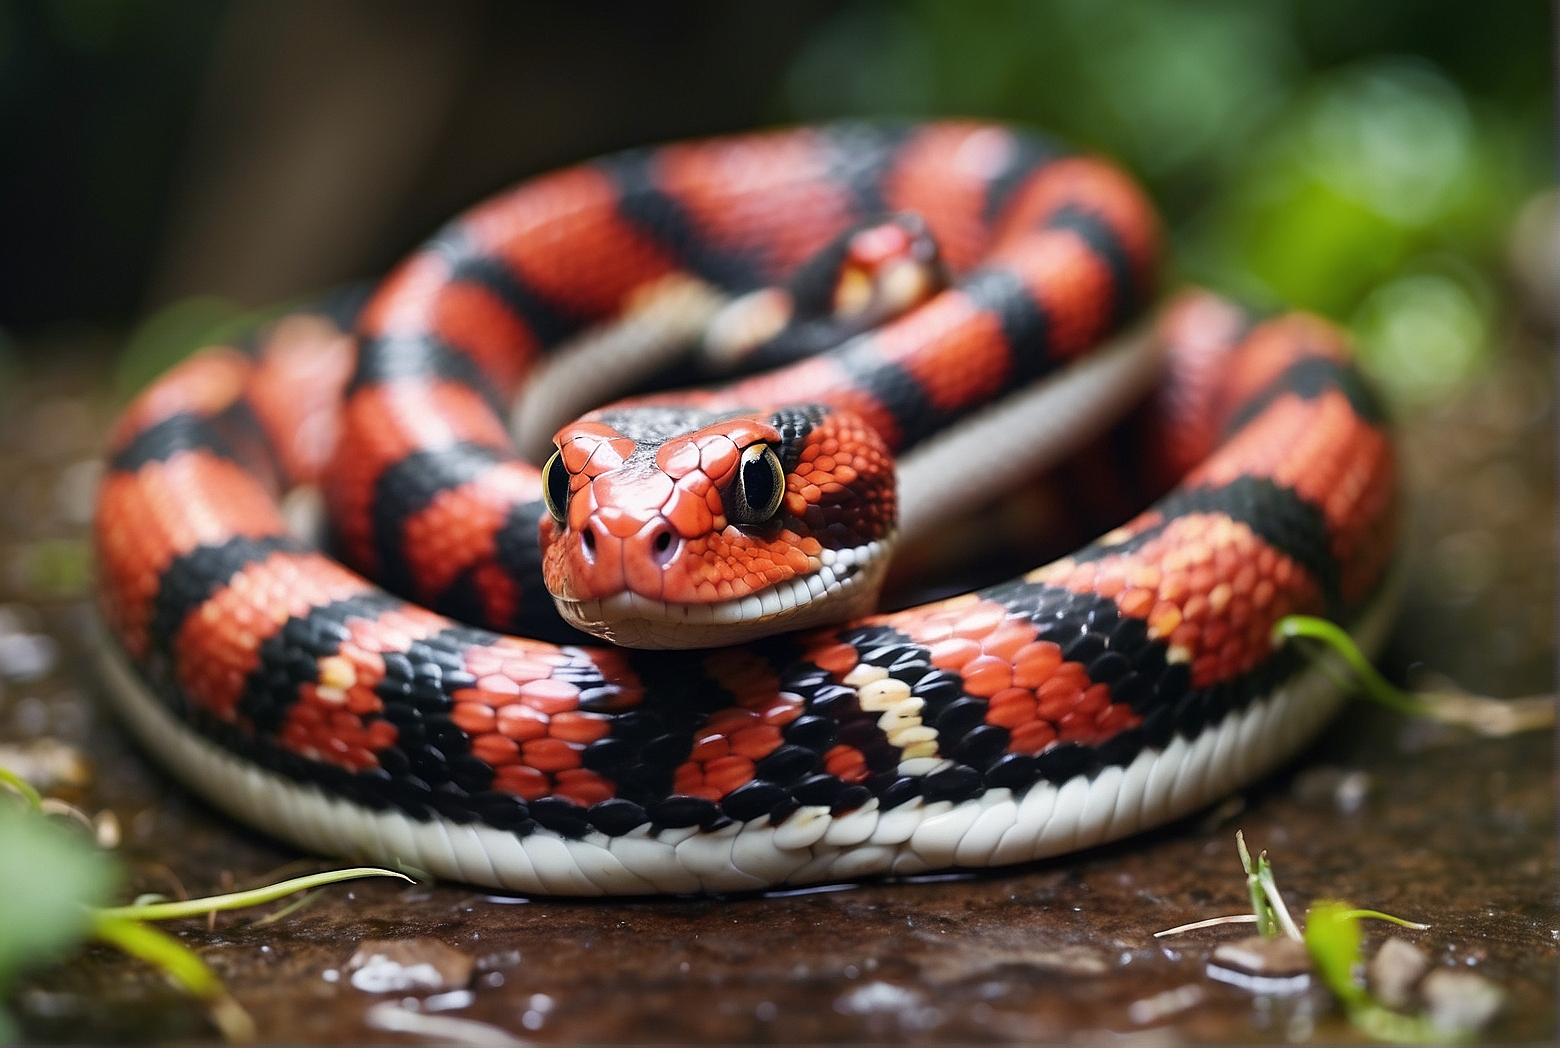 Beginner’s Guide to Caring for a Milk Snake